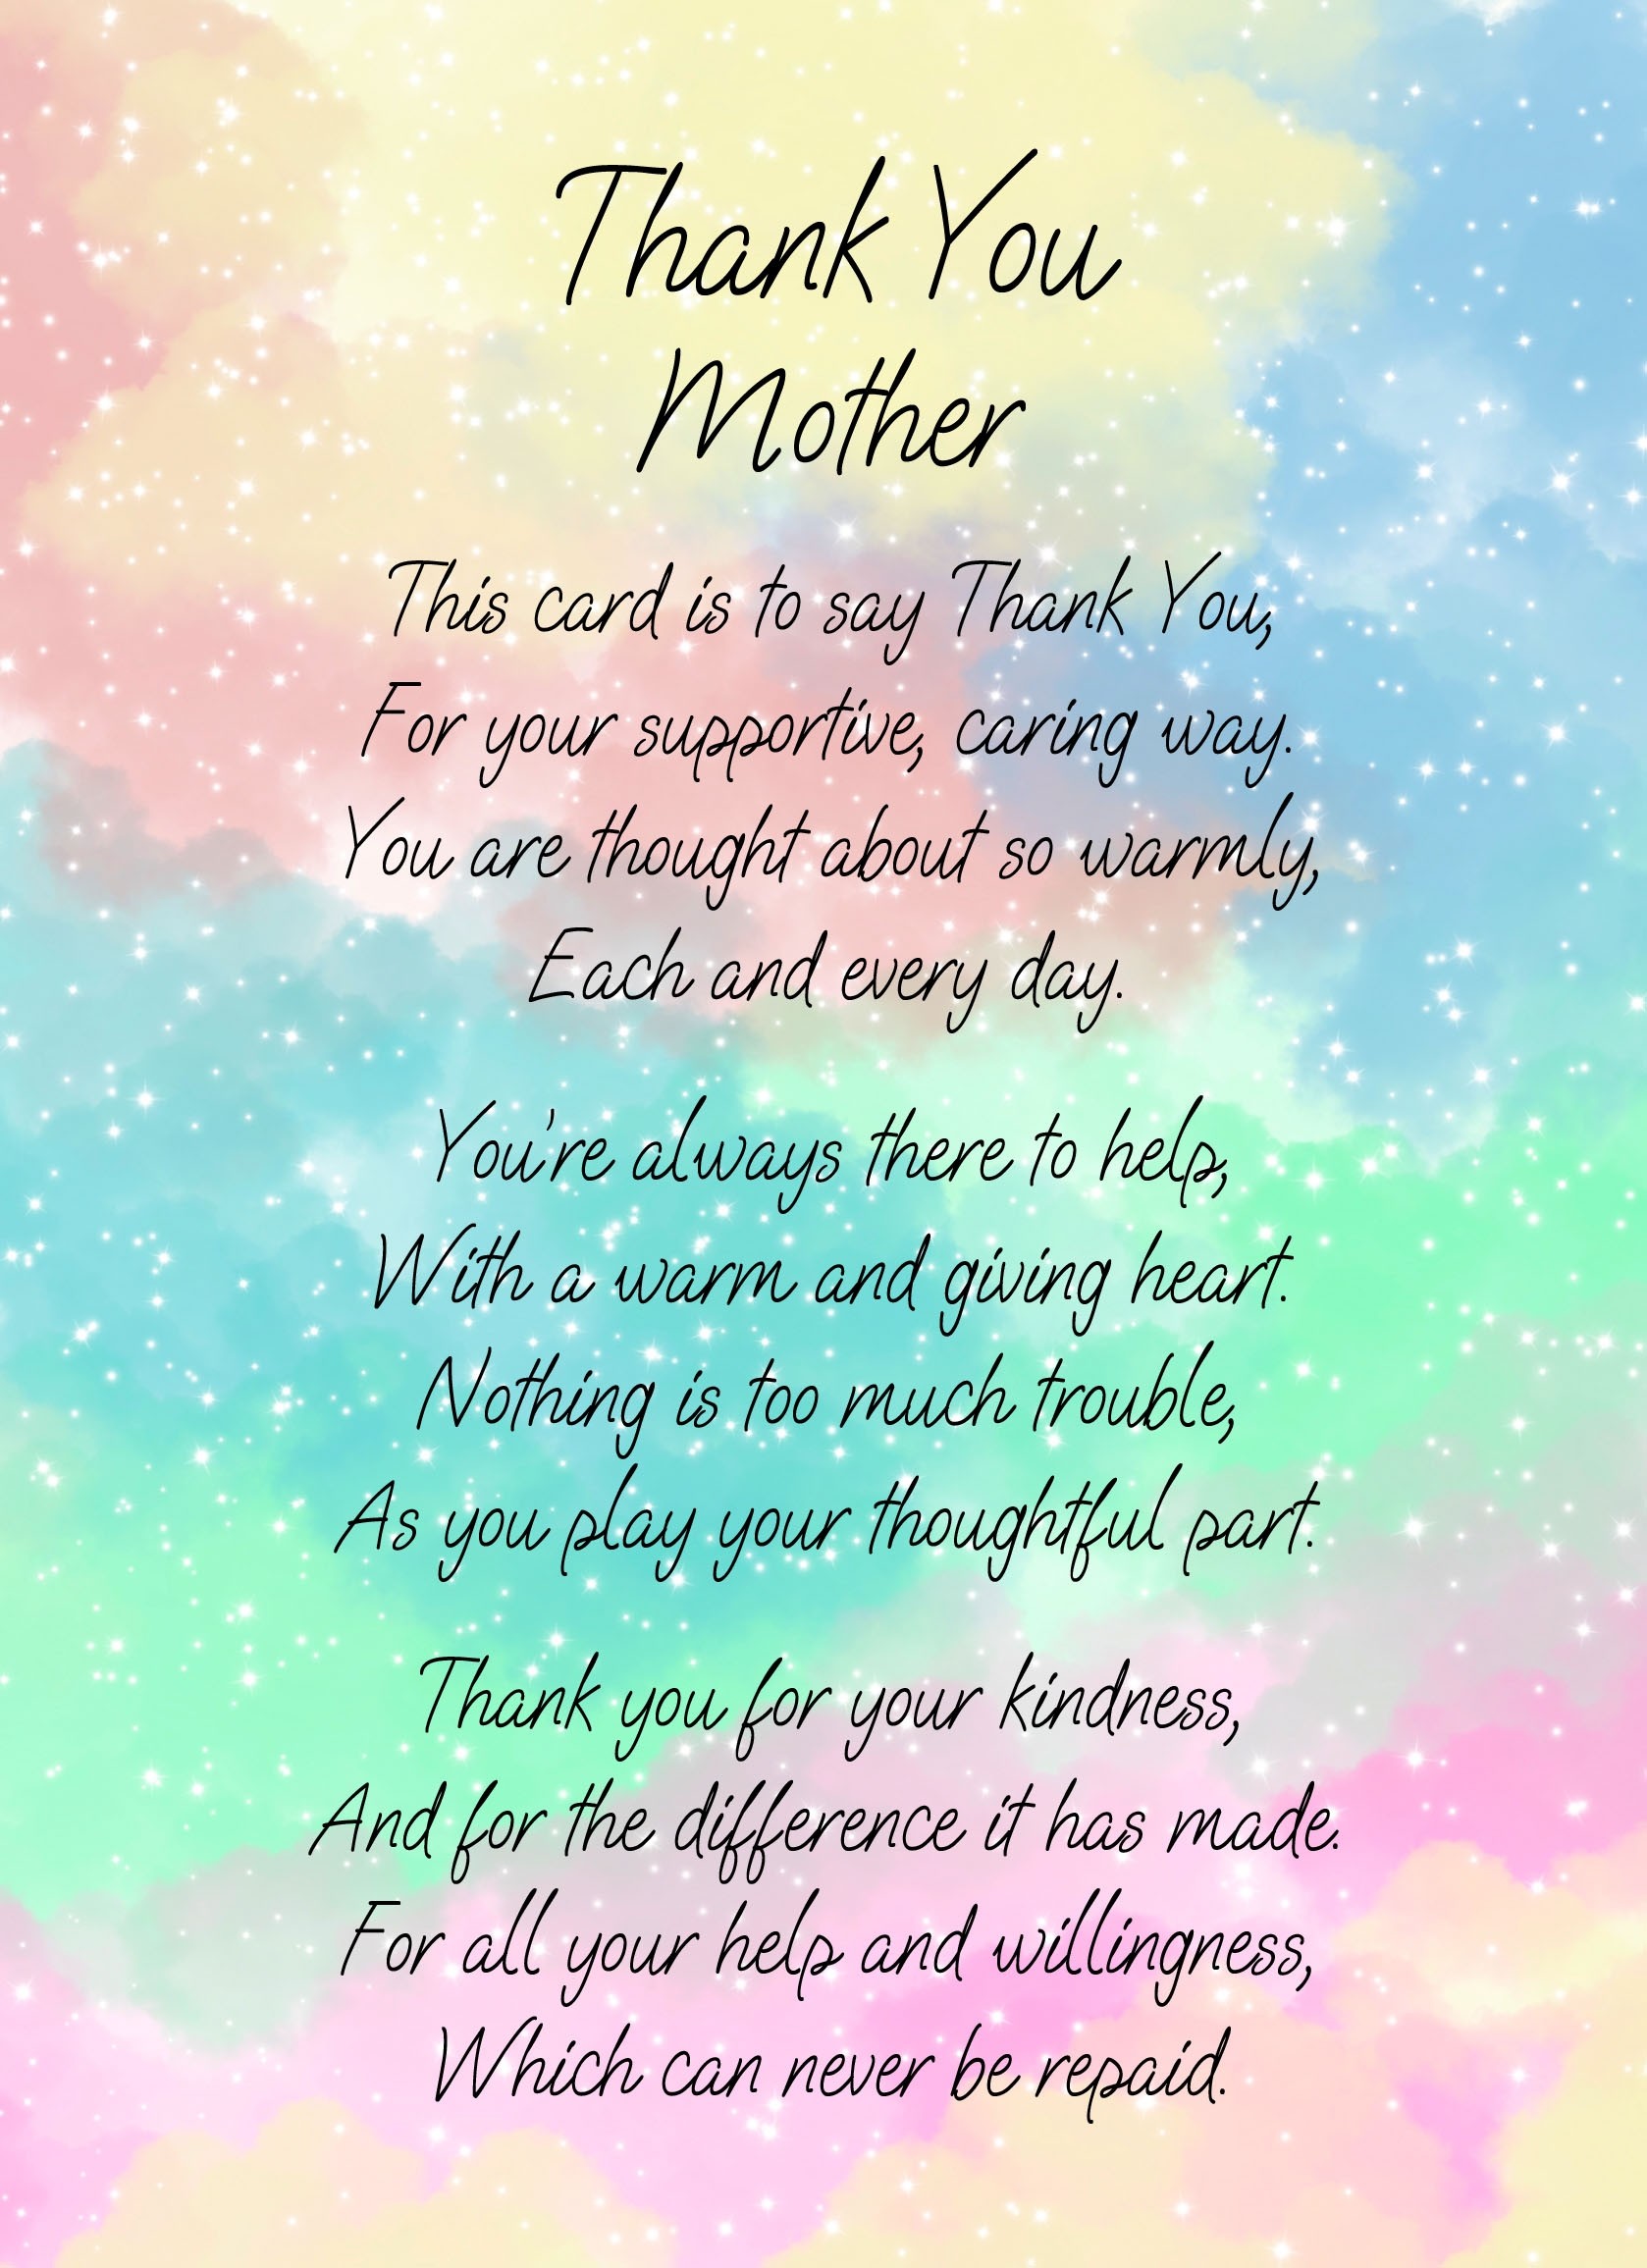 Thank You Poem Verse Card For Mother